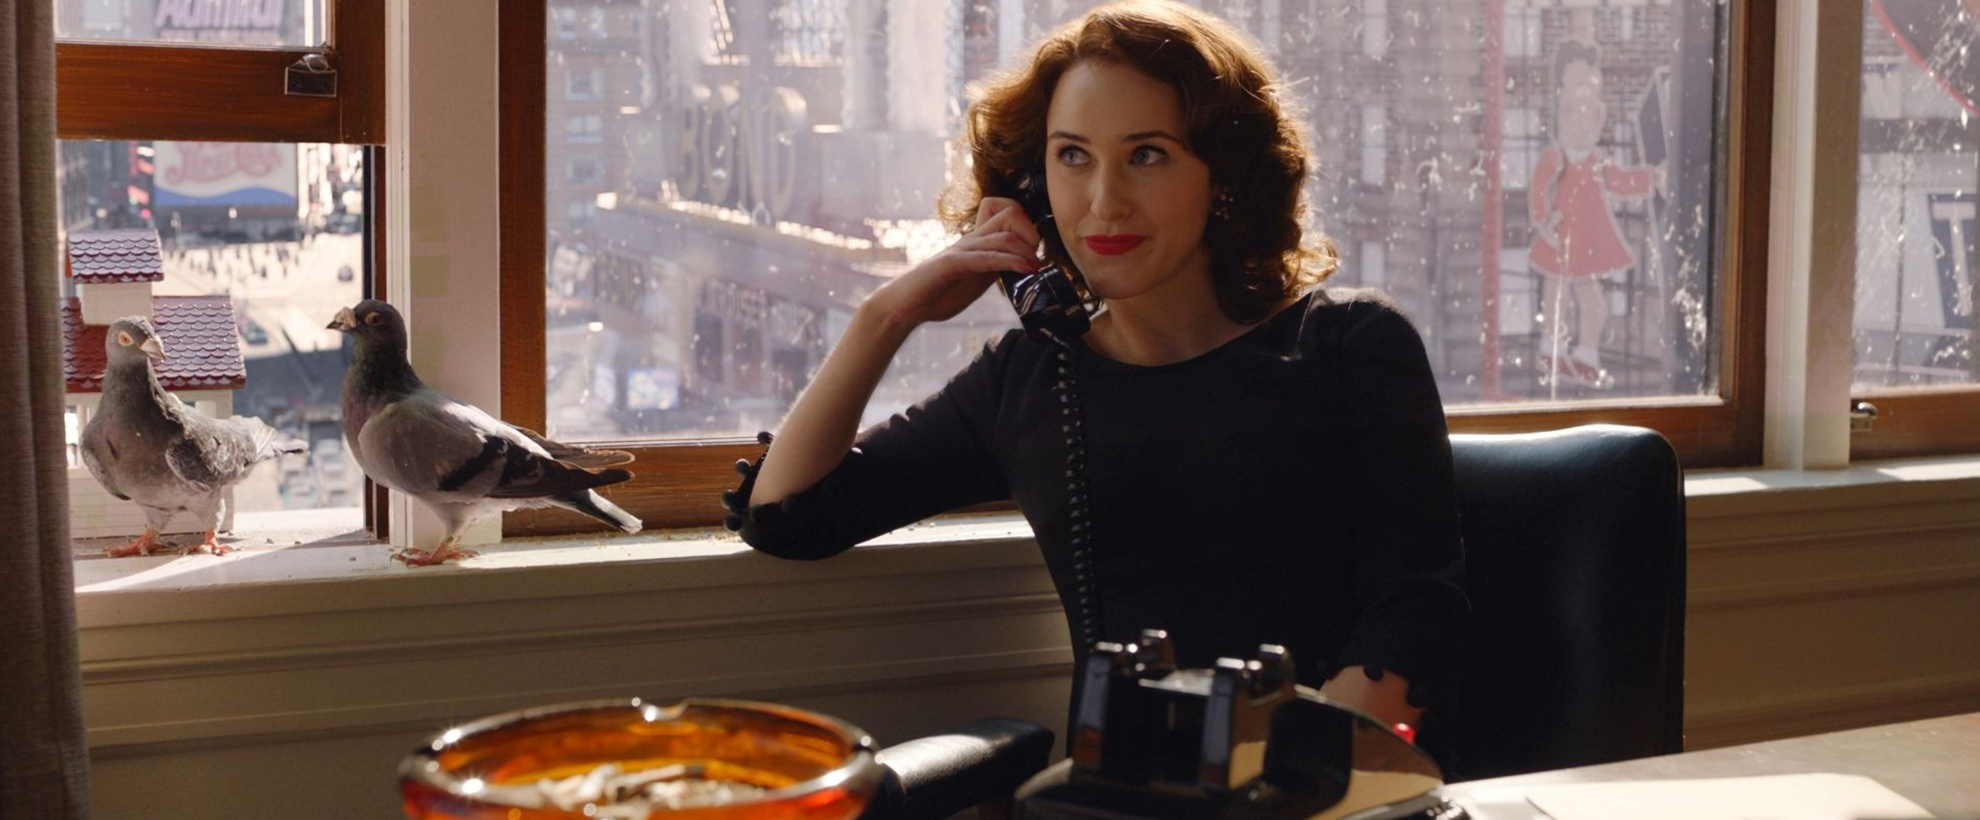 Miriam 'Midge' Maisel sits at a desk chair with a cityscape behind her seen through the windows